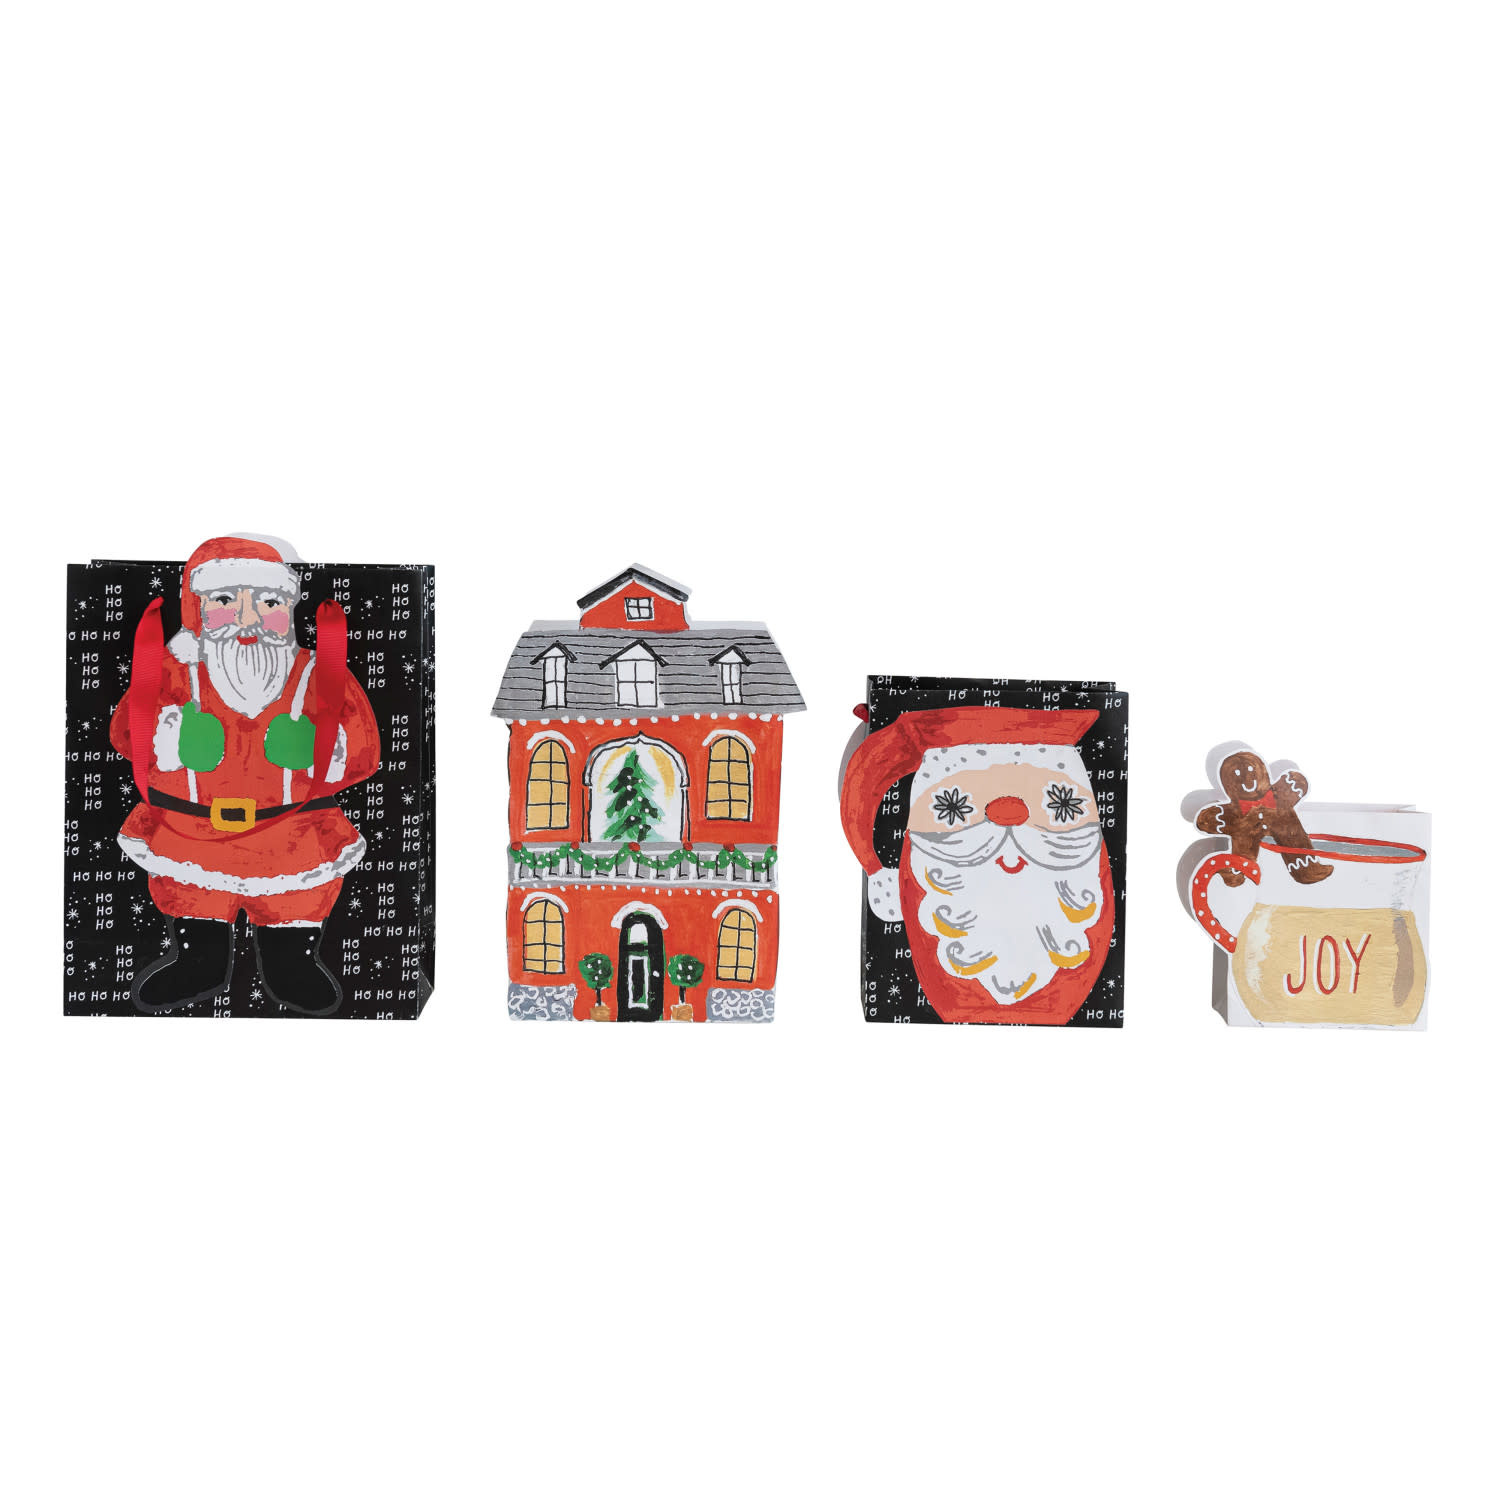 Assorted Printed Recycled Paper Holiday Gift Bag - LG, Priced Individually